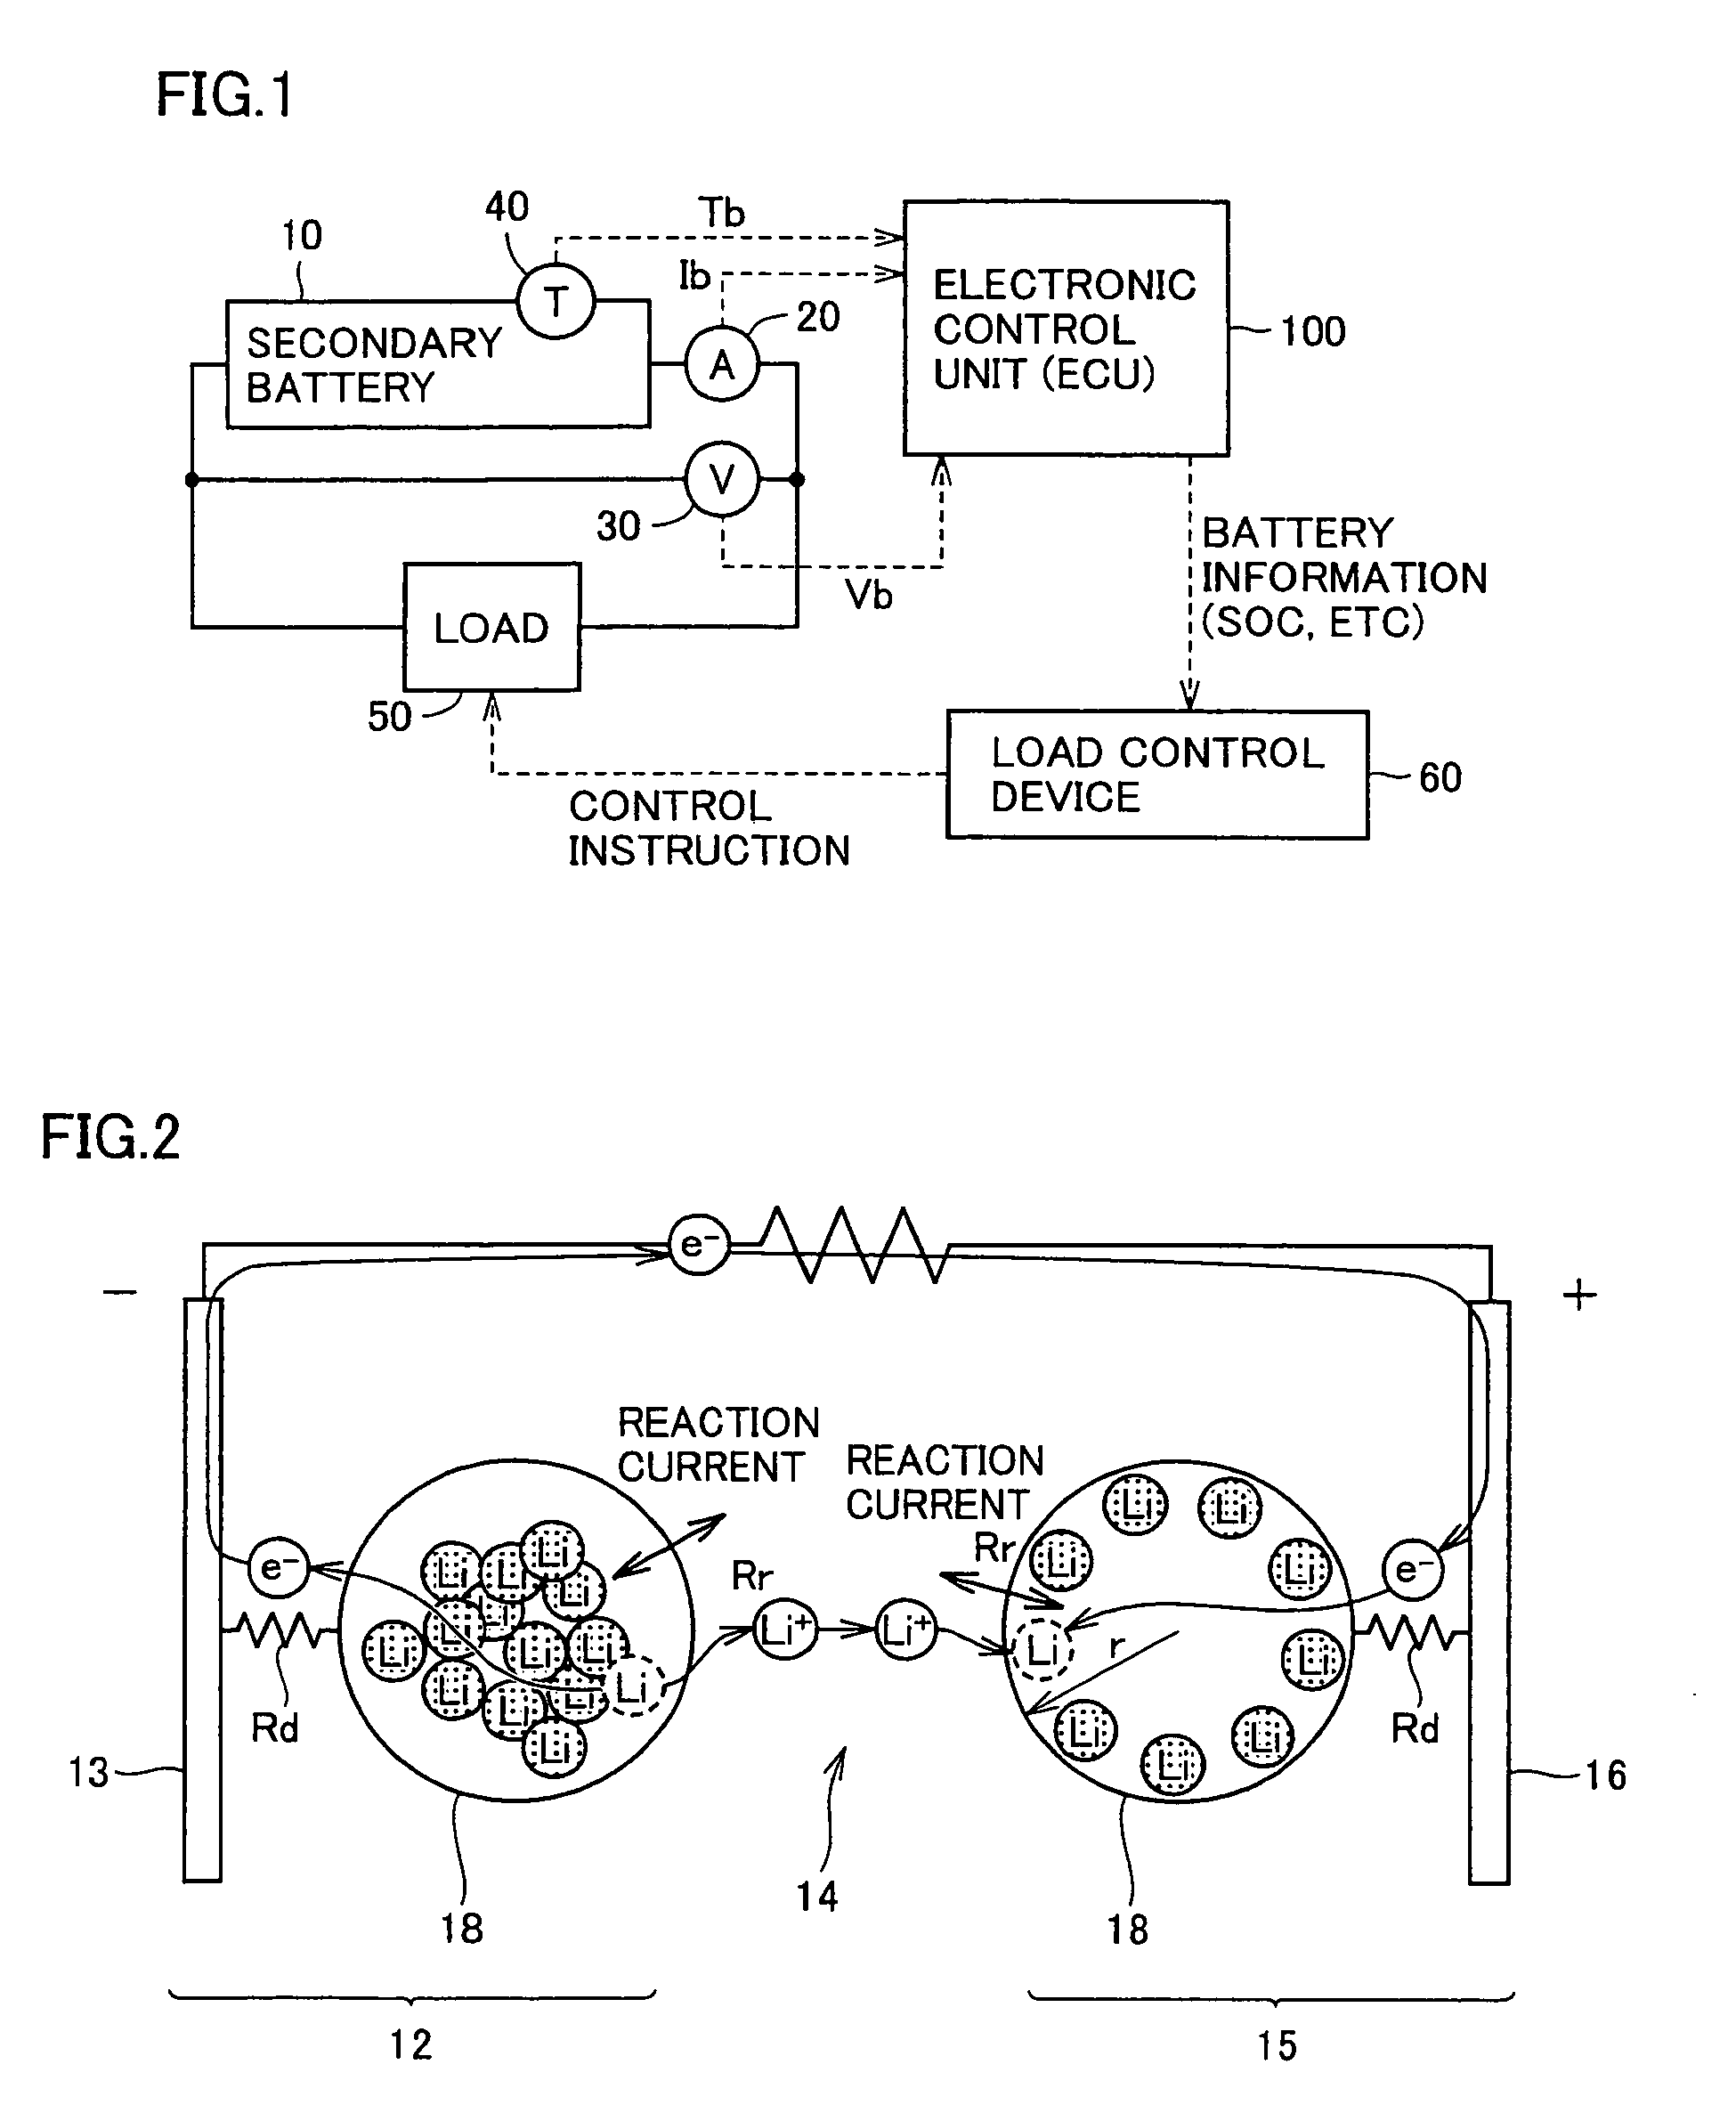 State estimating device of secondary battery